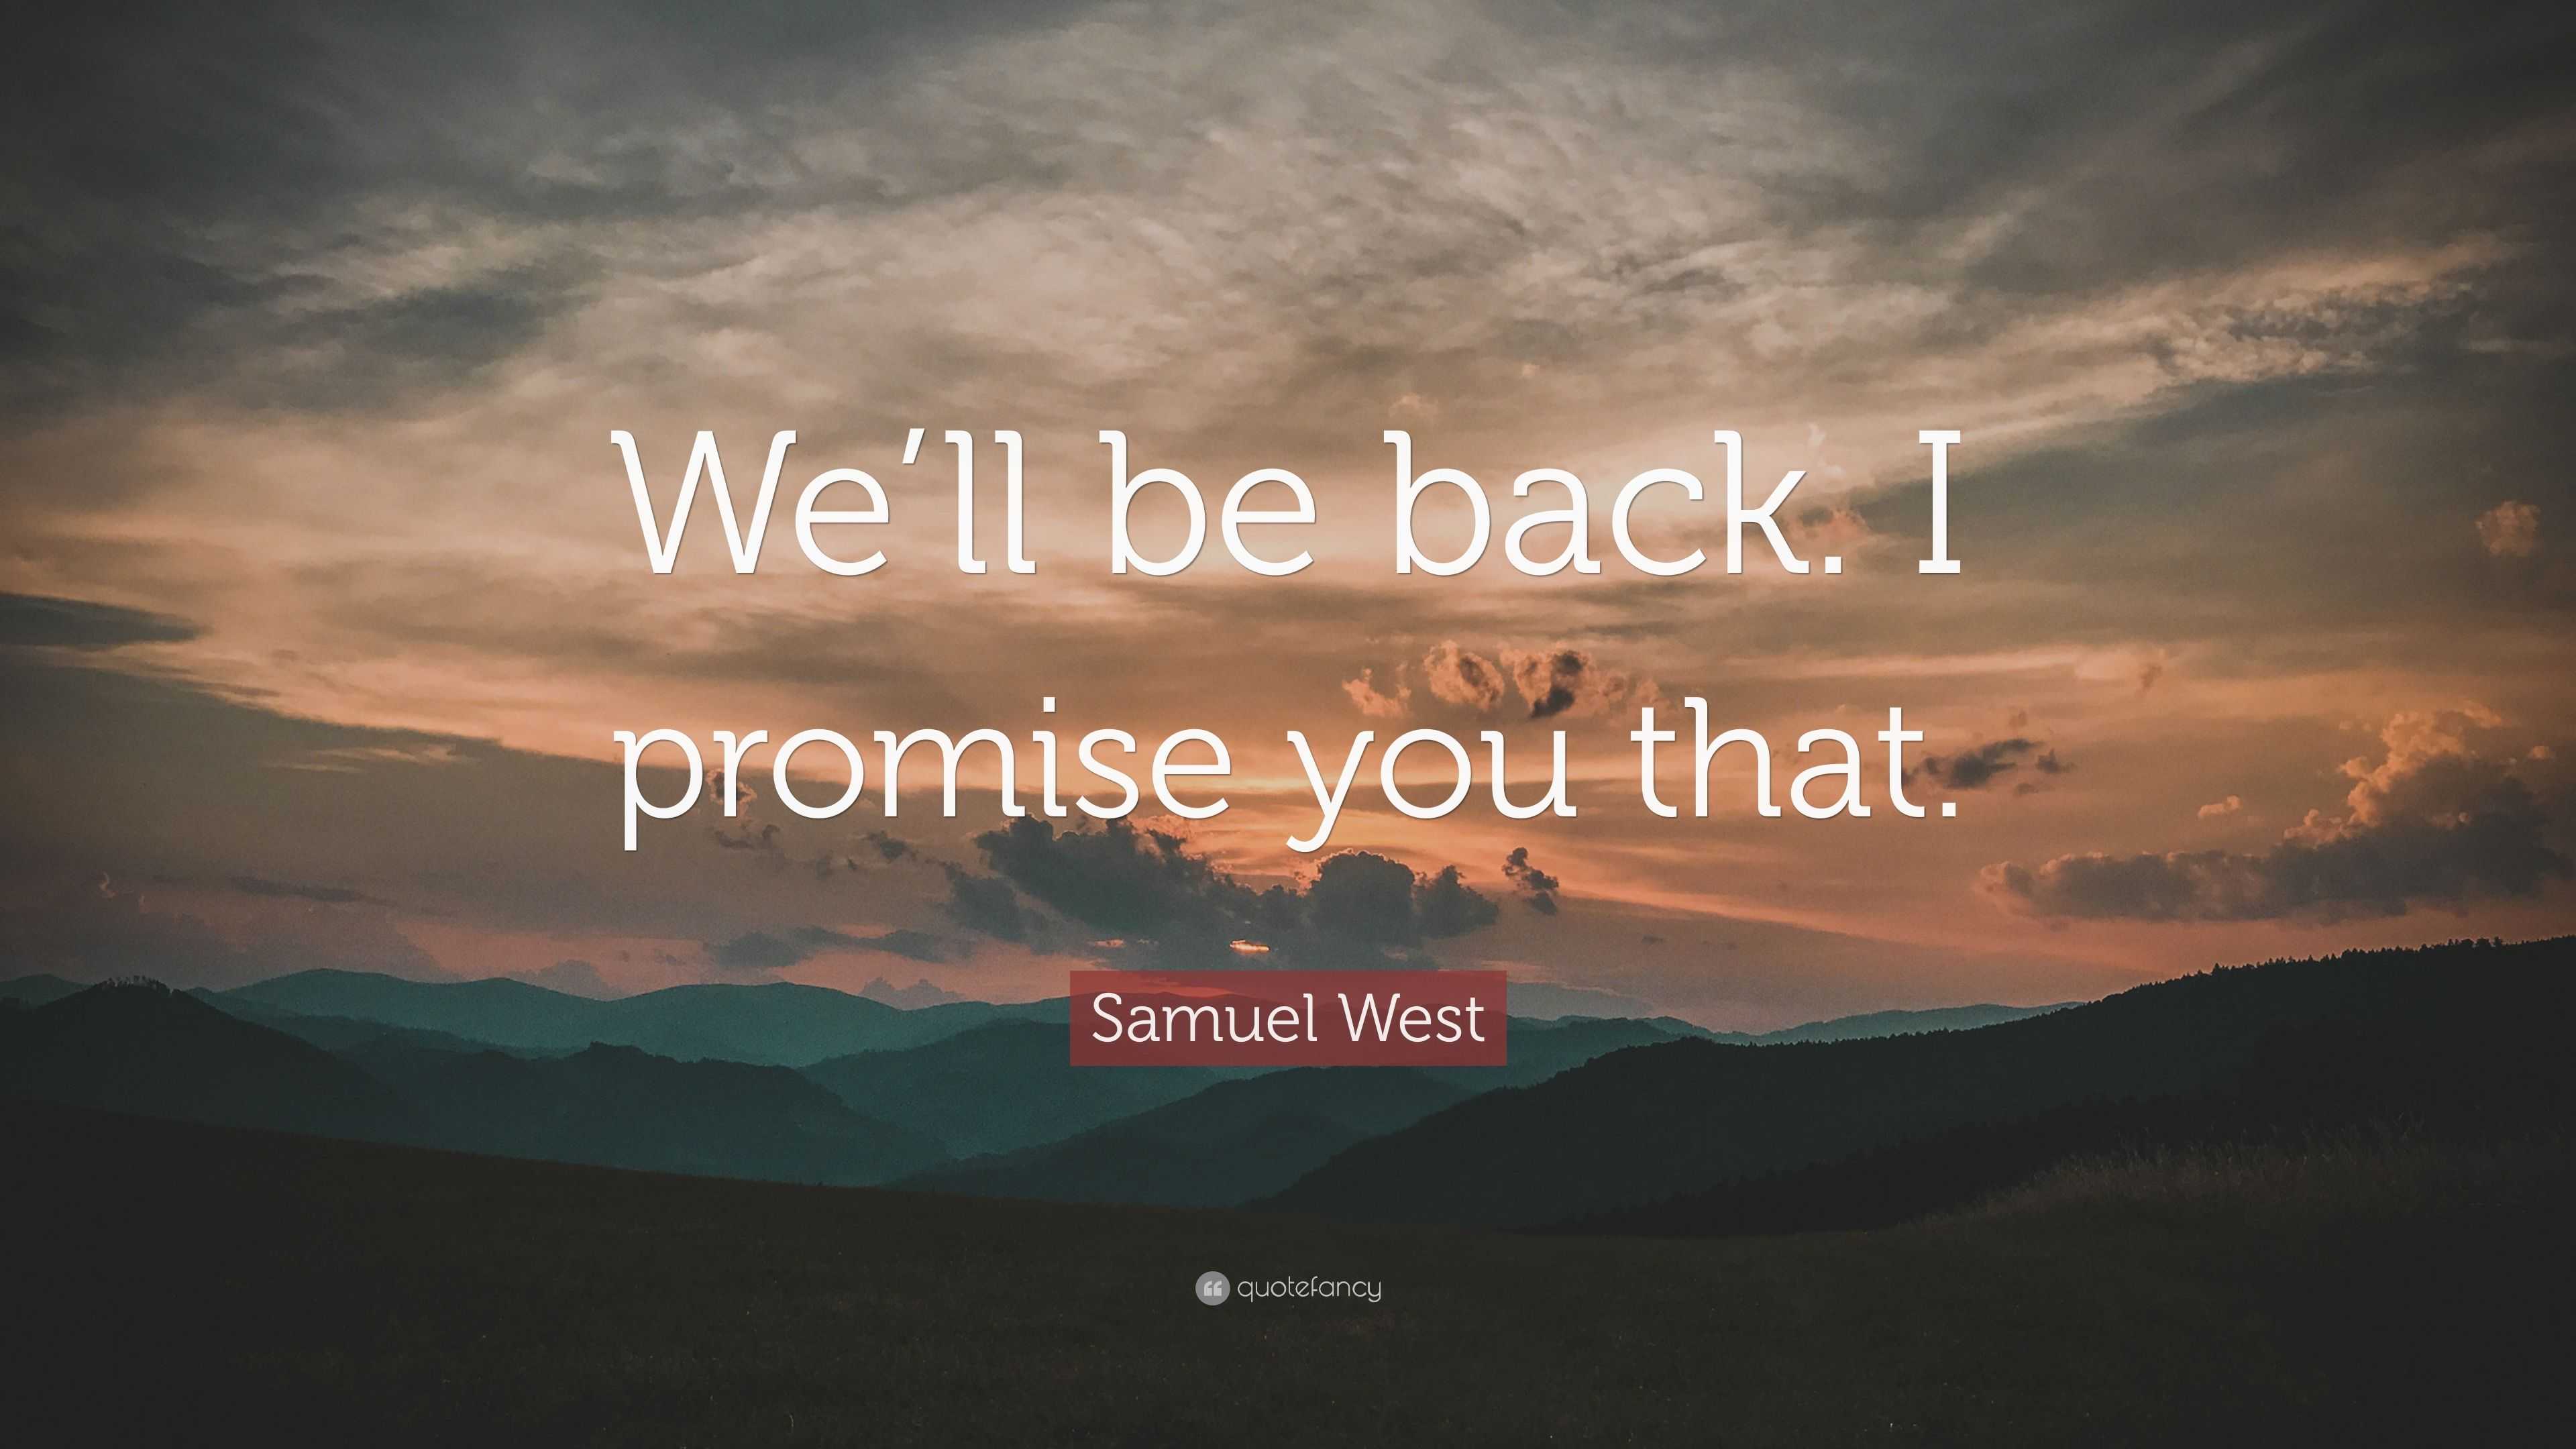 Samuel West Quote: “We'll be back. I promise you that.”